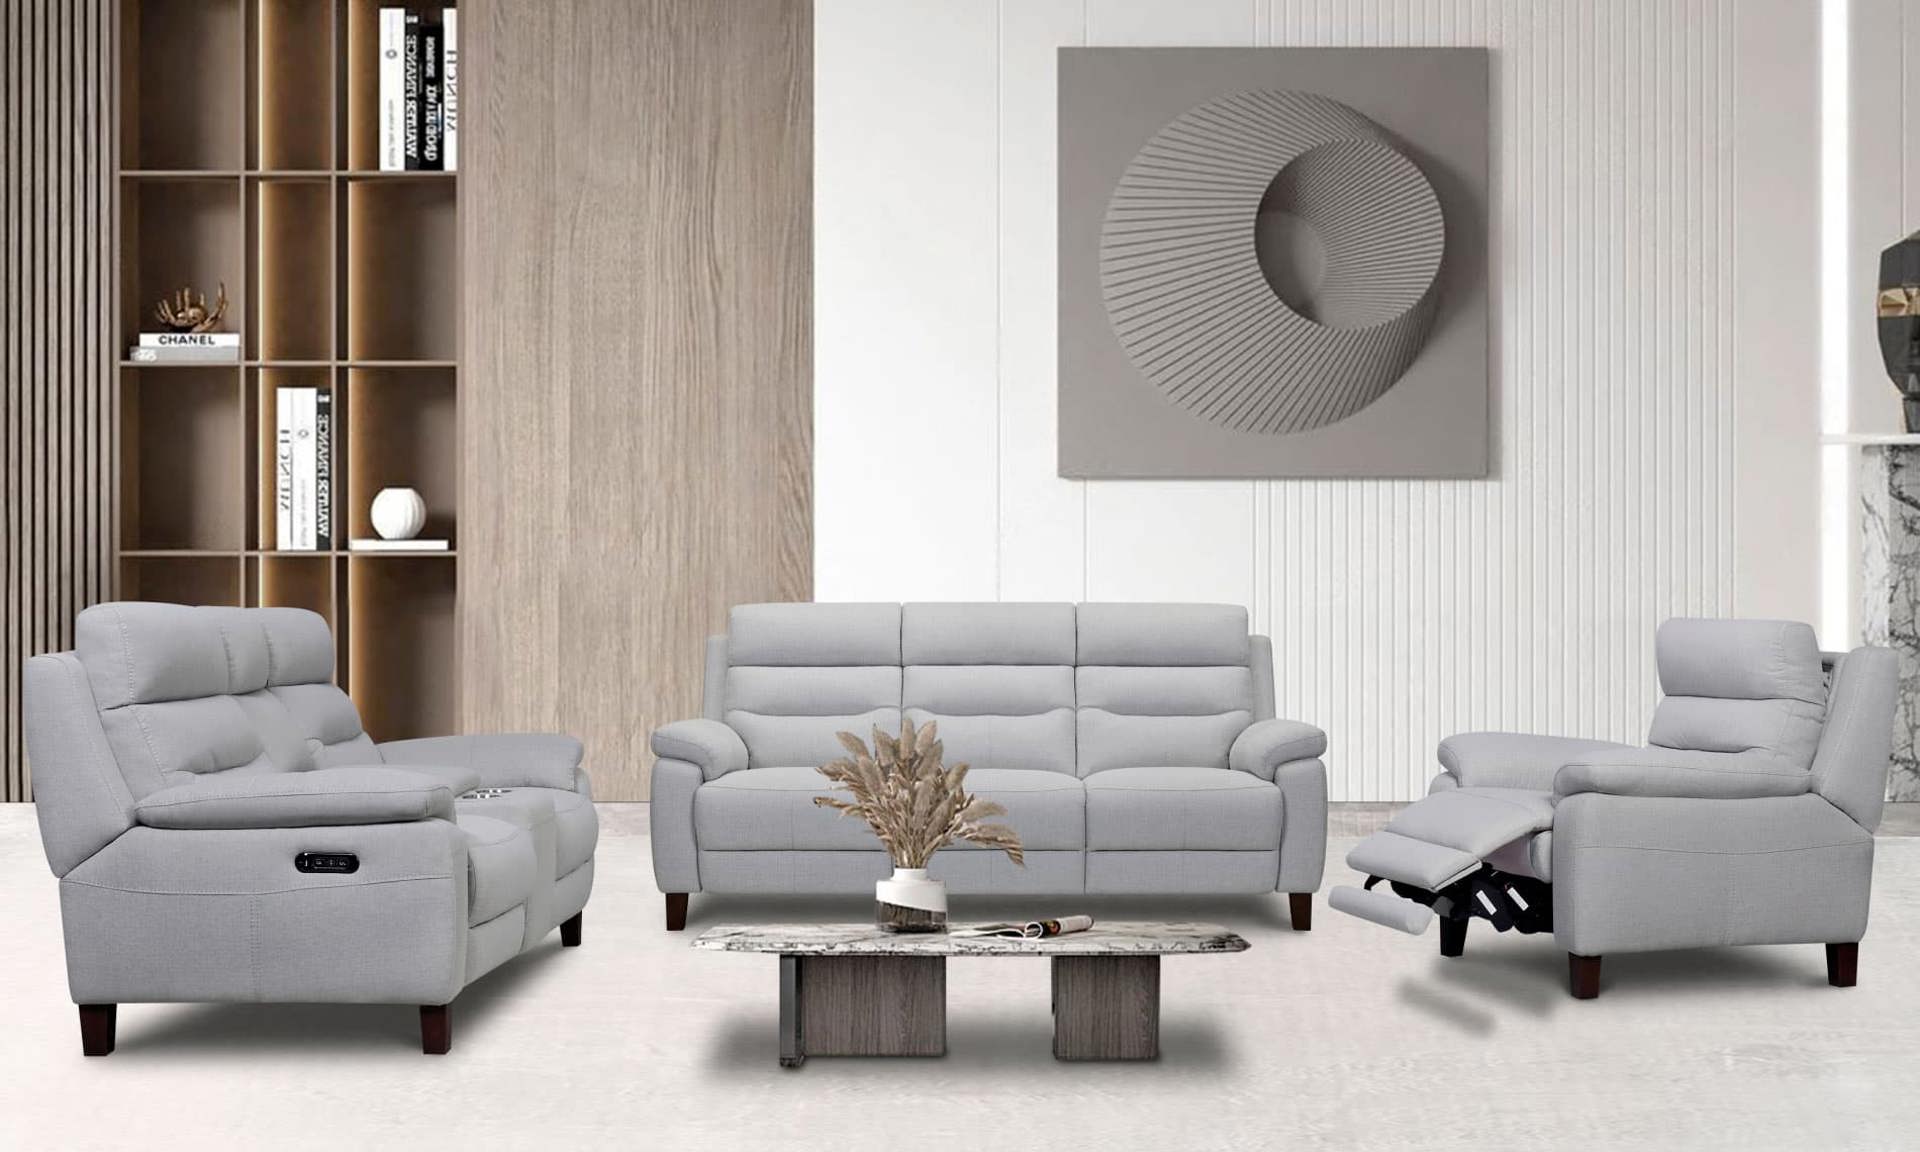 Living room set by Jessica Jacobs that power reclines.